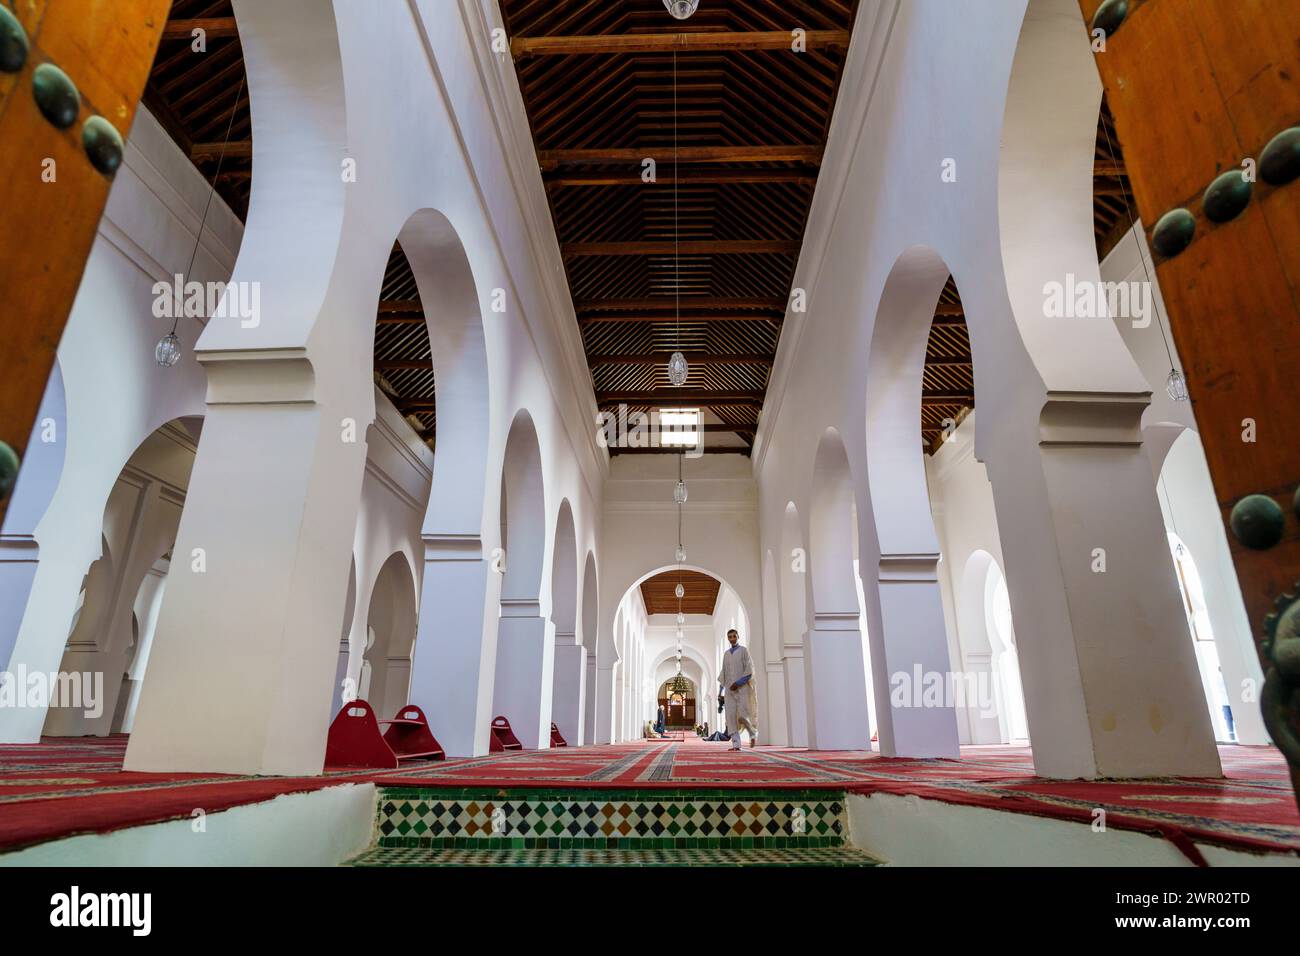 Al Karaouine Mosque, Built in the year 859, Fez, morocco, africa Stock Photo